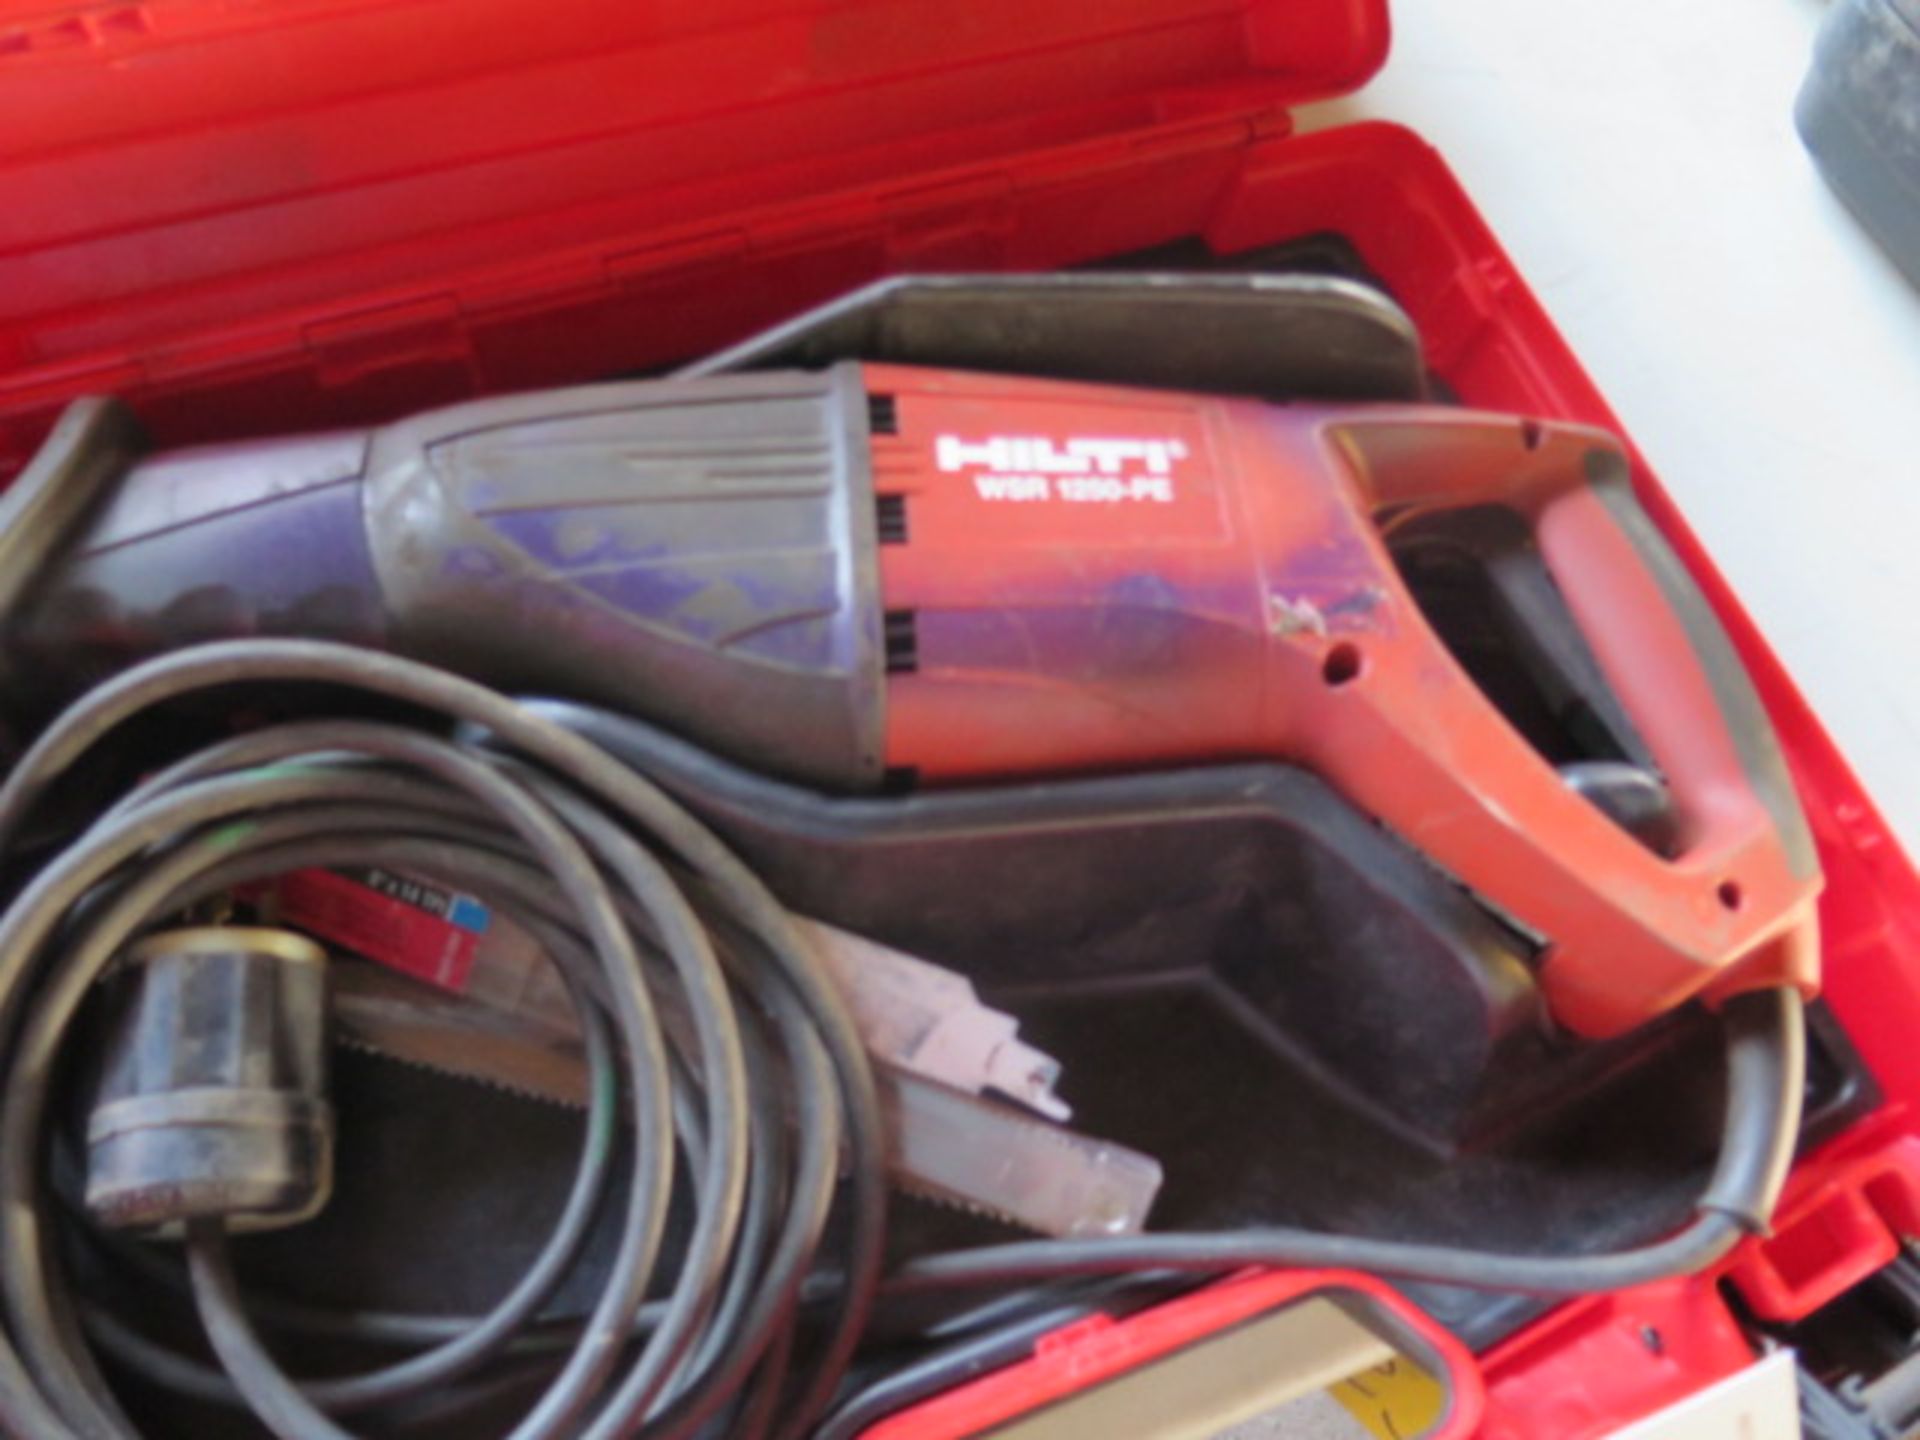 Hilti WSR 1250-PE Recipricating Saw (SOLD AS-IS - NO WARRANTY) - Image 4 of 5